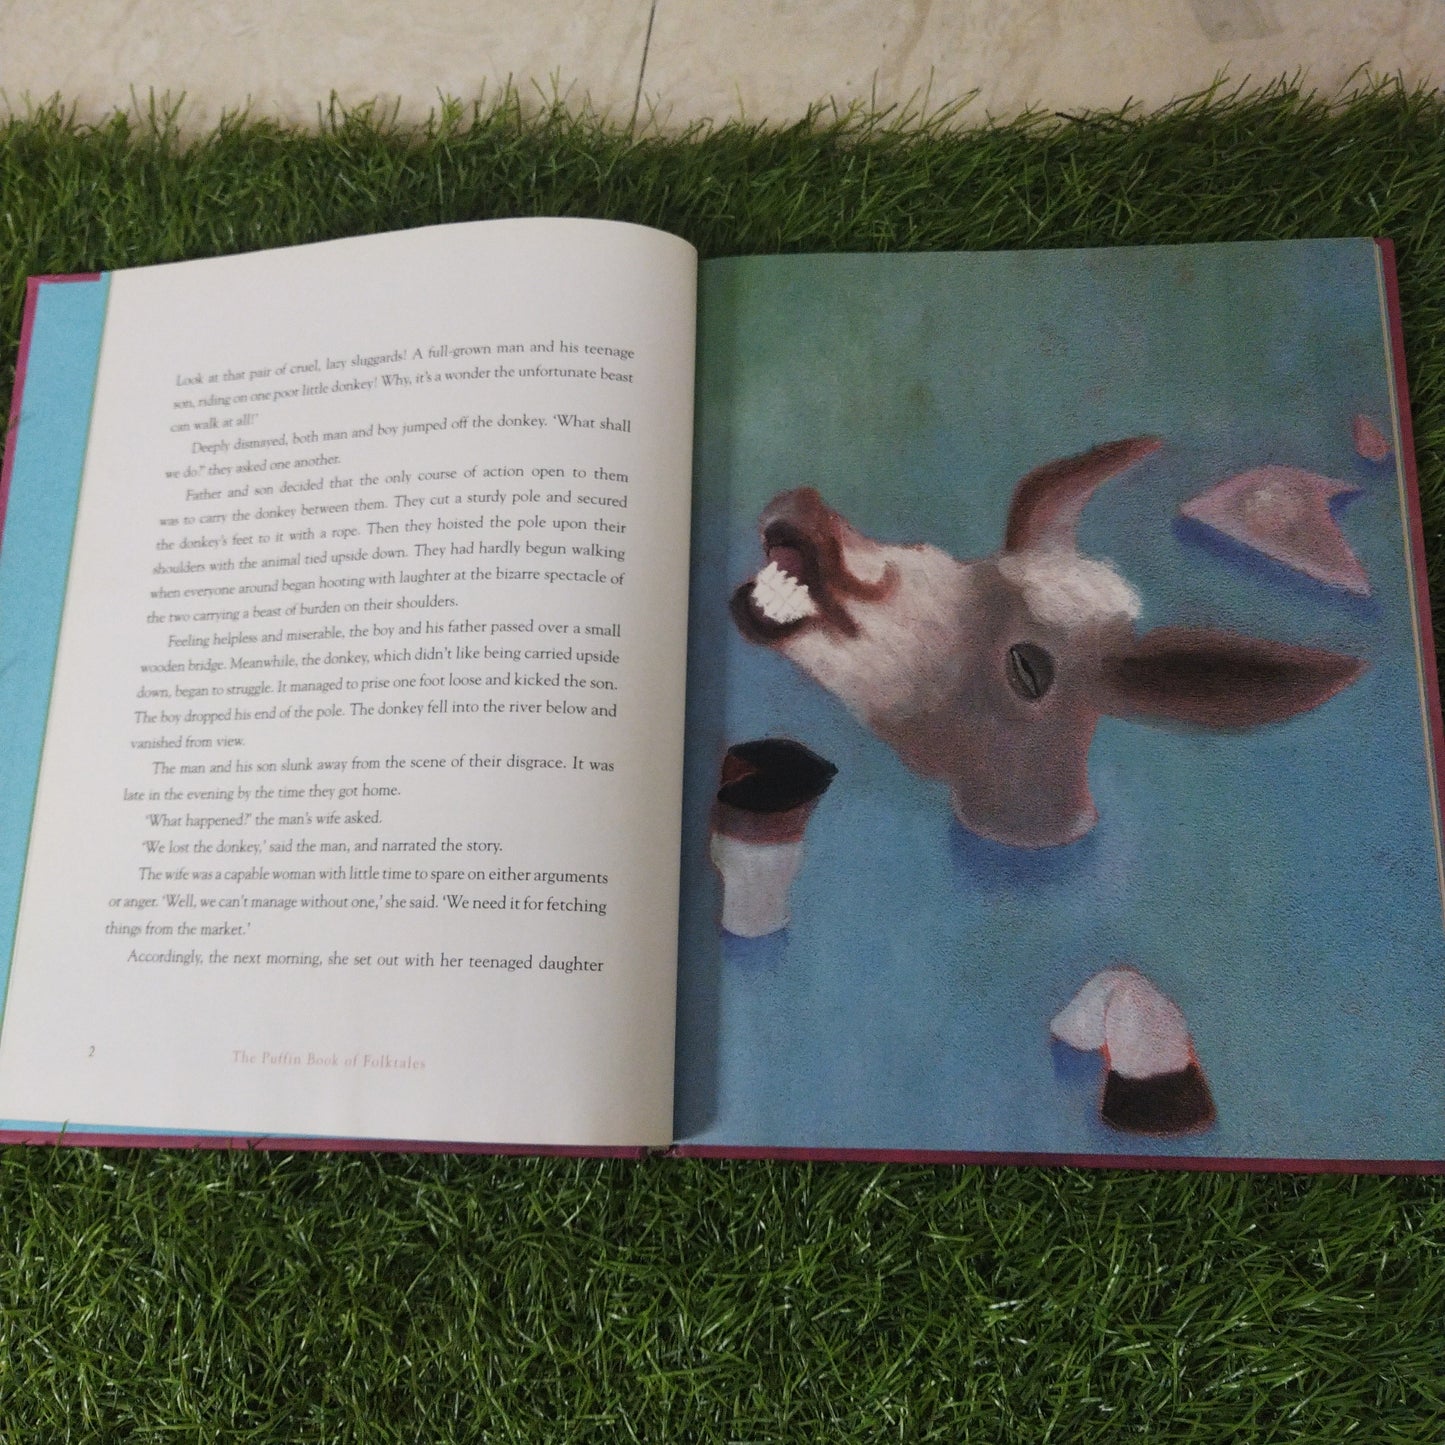 The Puffin Book of Folktales